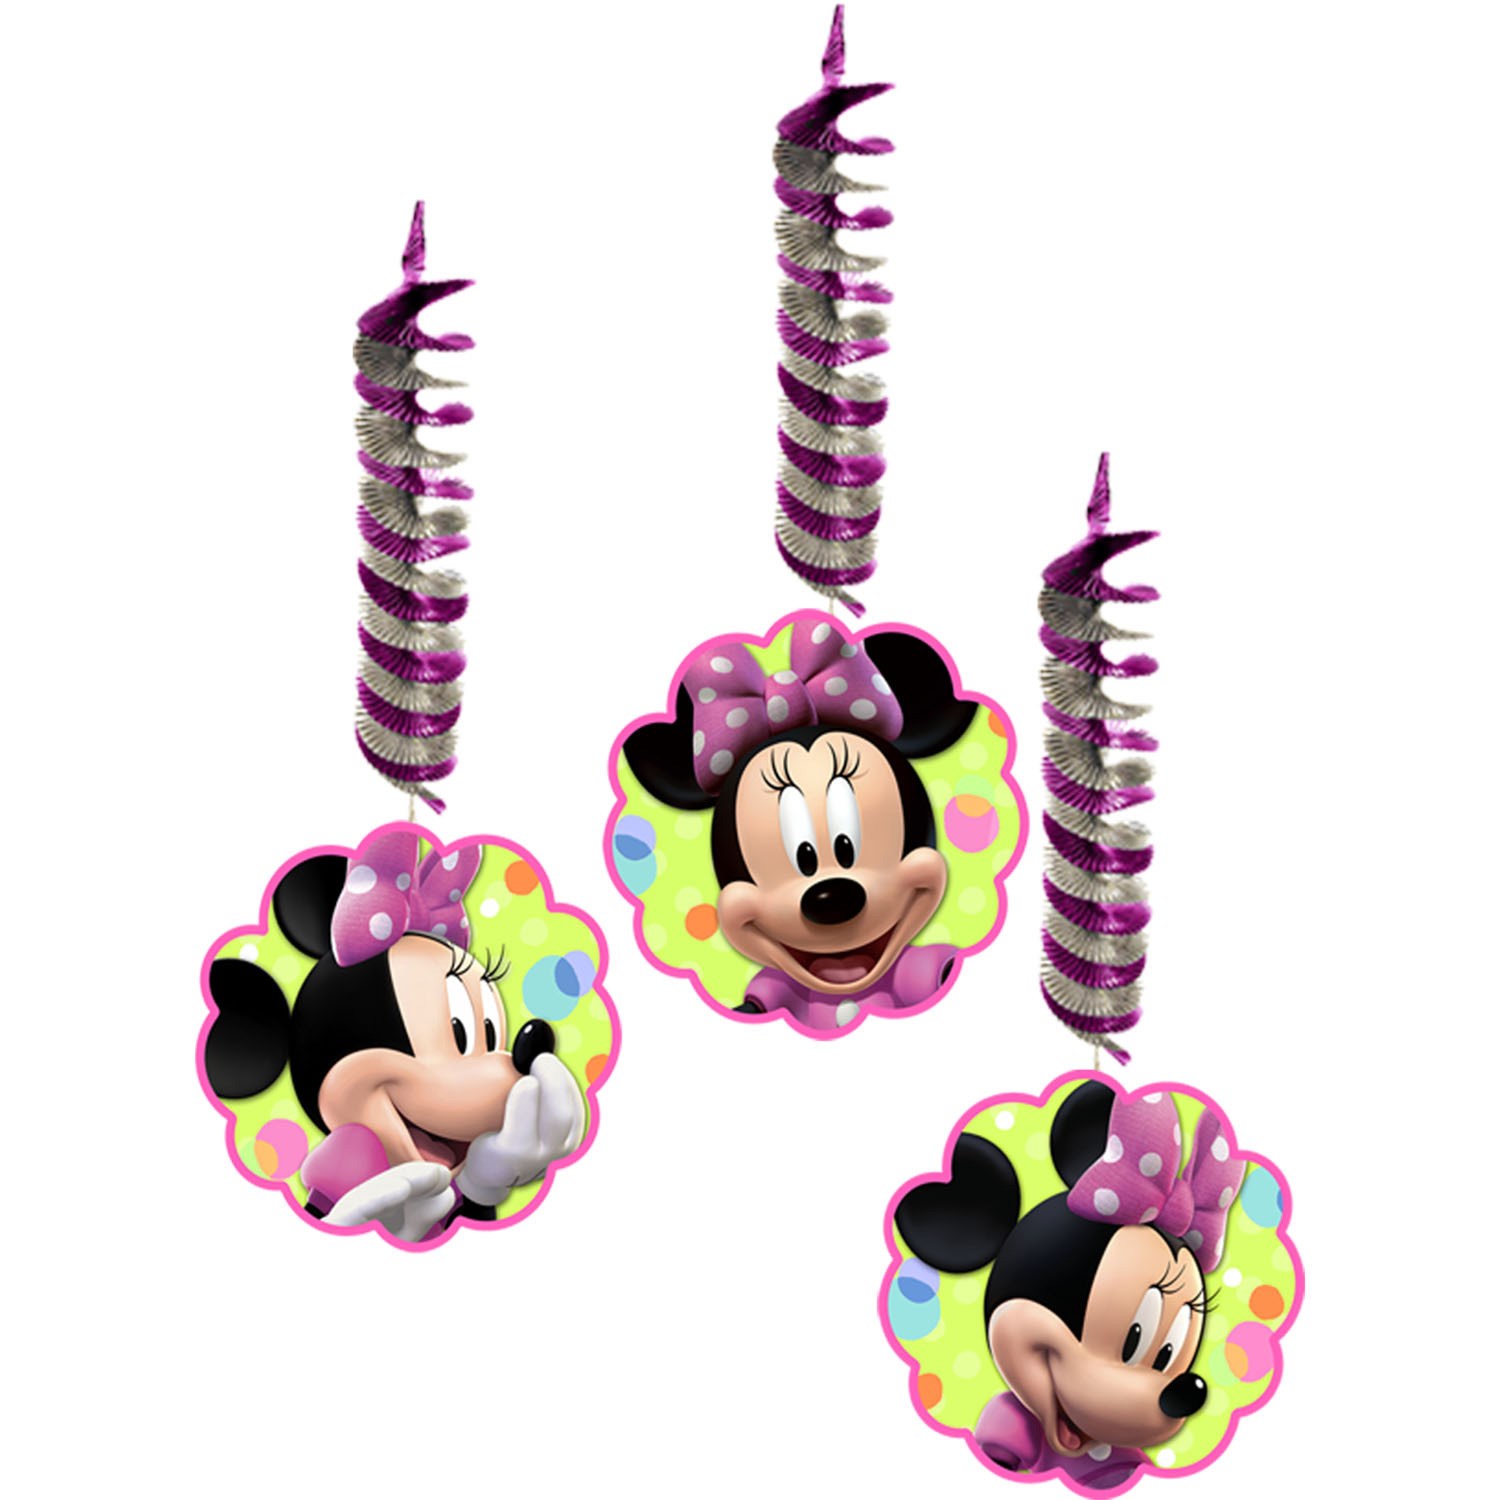 Disney Minnie Mouse Bow-tique Hanging Danglers 3 count